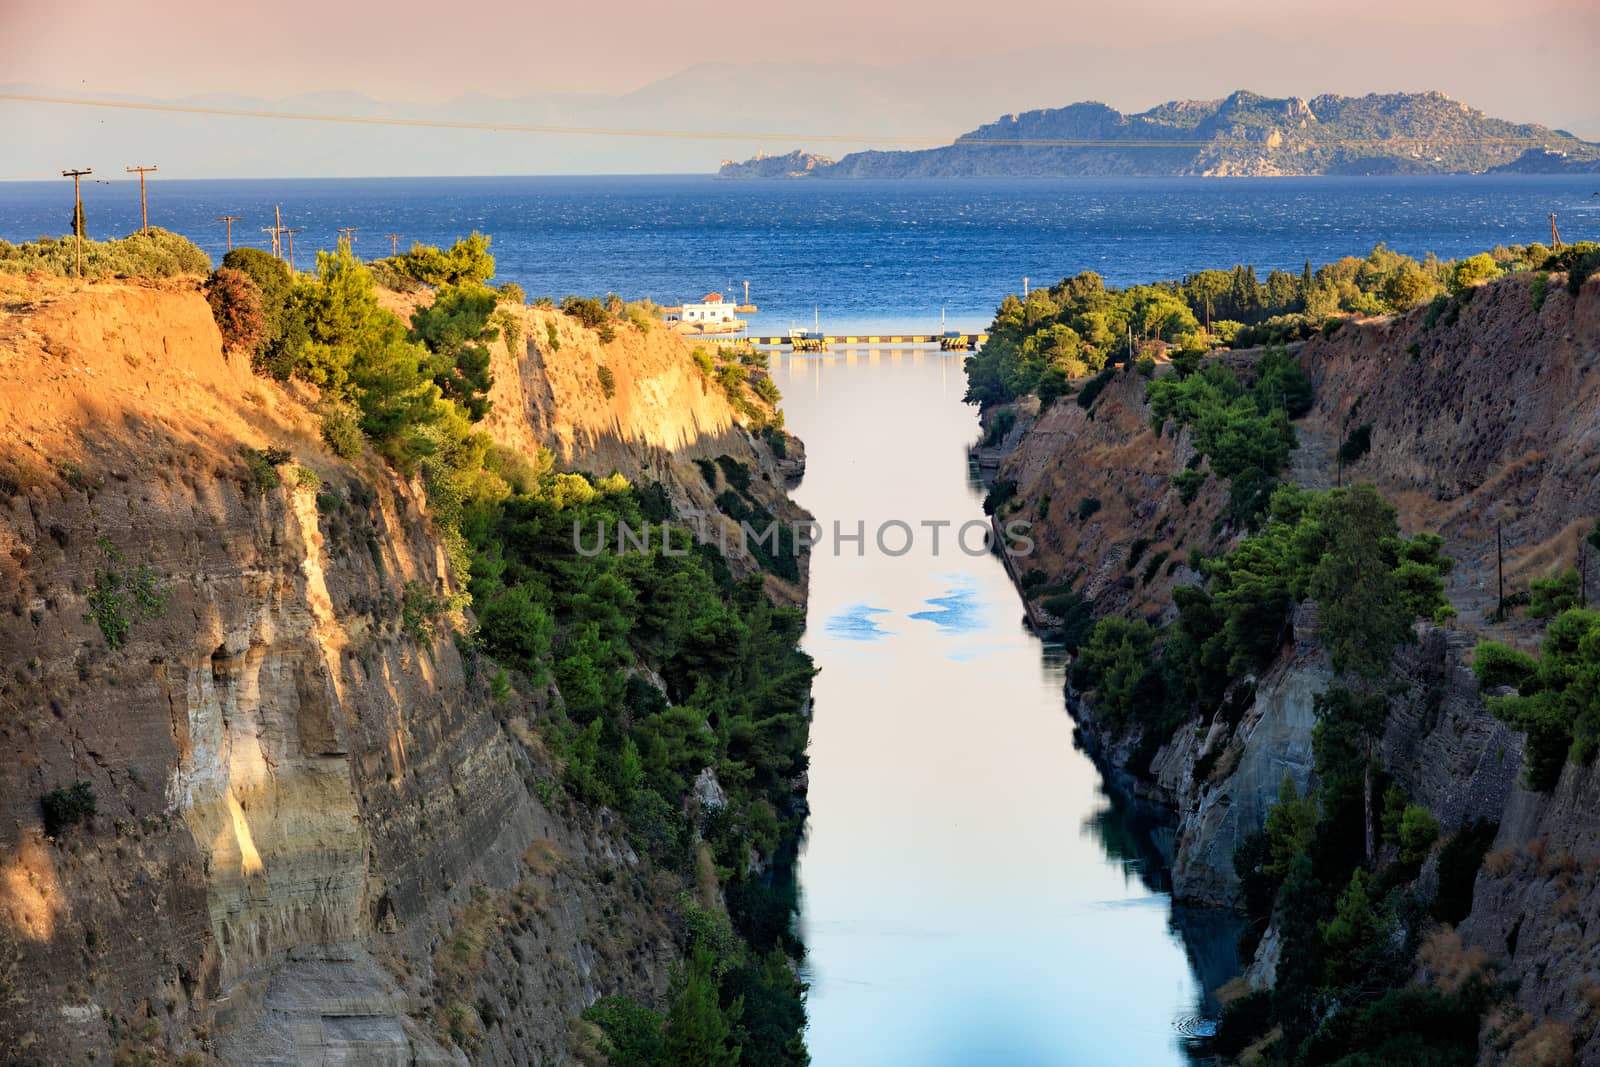 View of the Corinth Canal in Greece, the shortest European canal 6.3 km long, connecting the Aegean and Ionian Seas. by Sergii